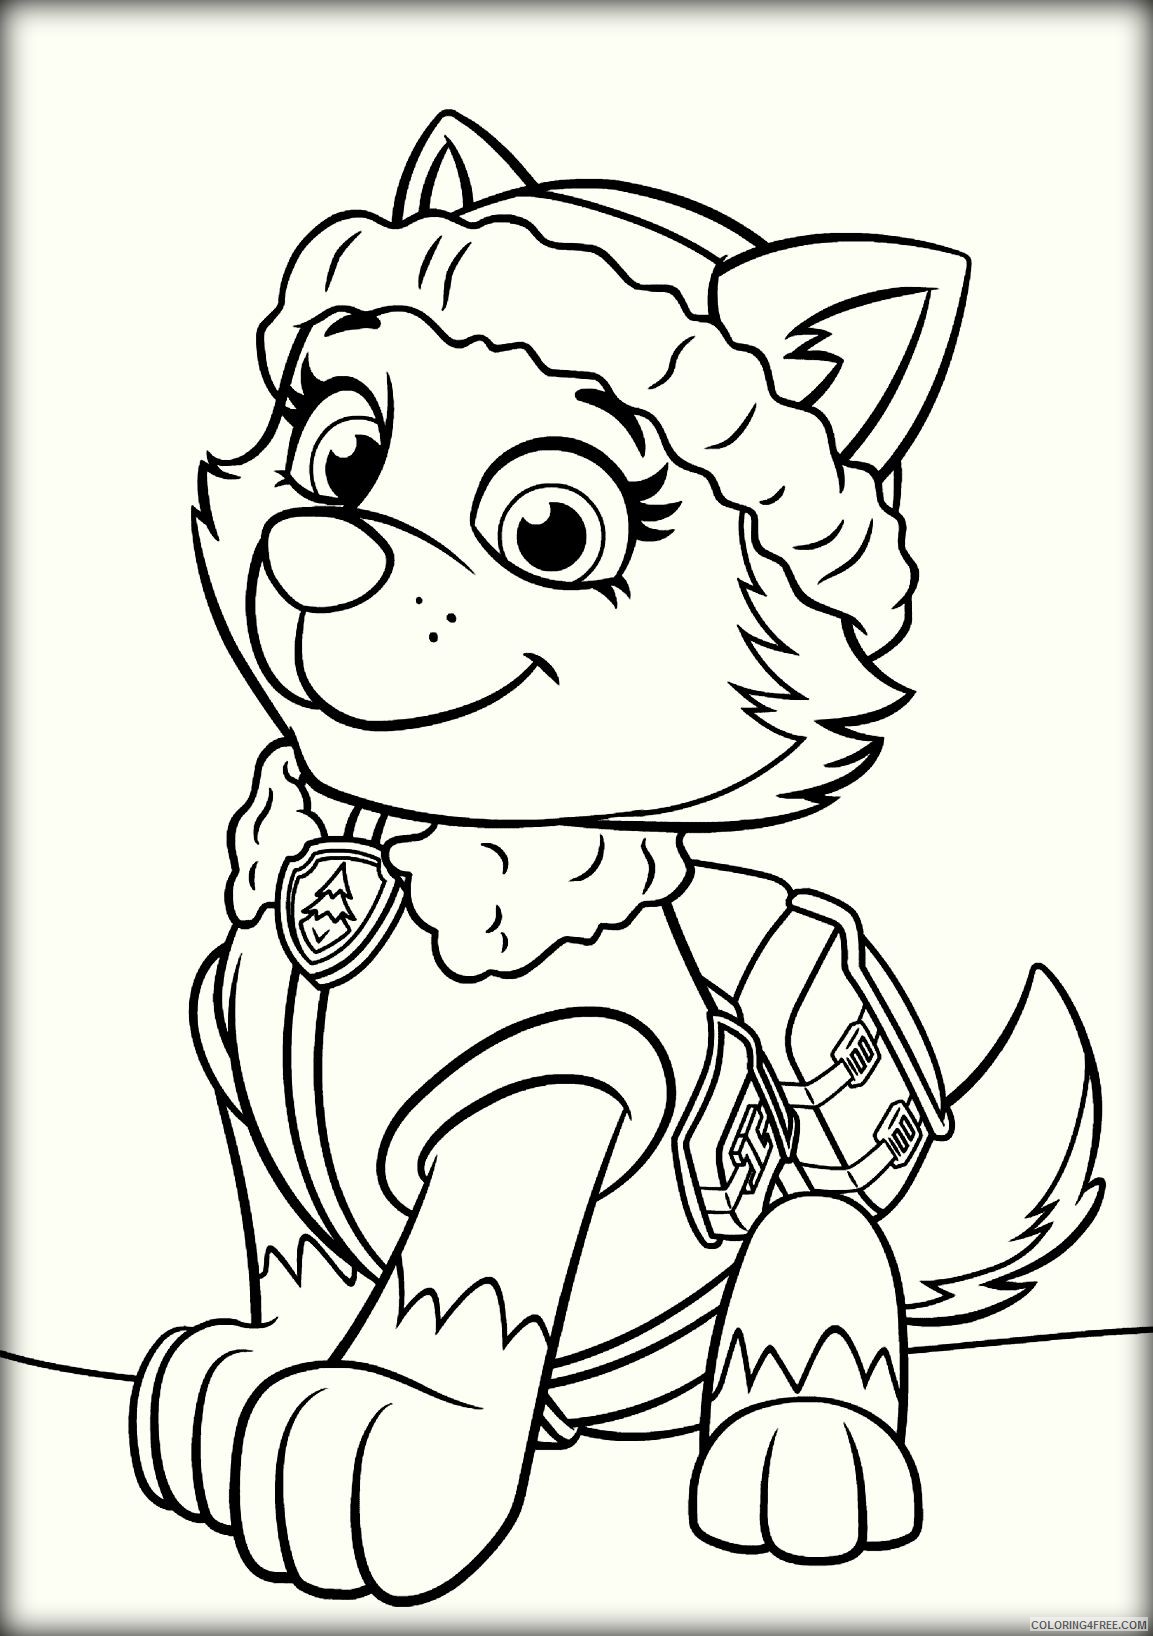 Paw Patrol Coloring Pages Coloring4free - Coloring4Free.com - Home